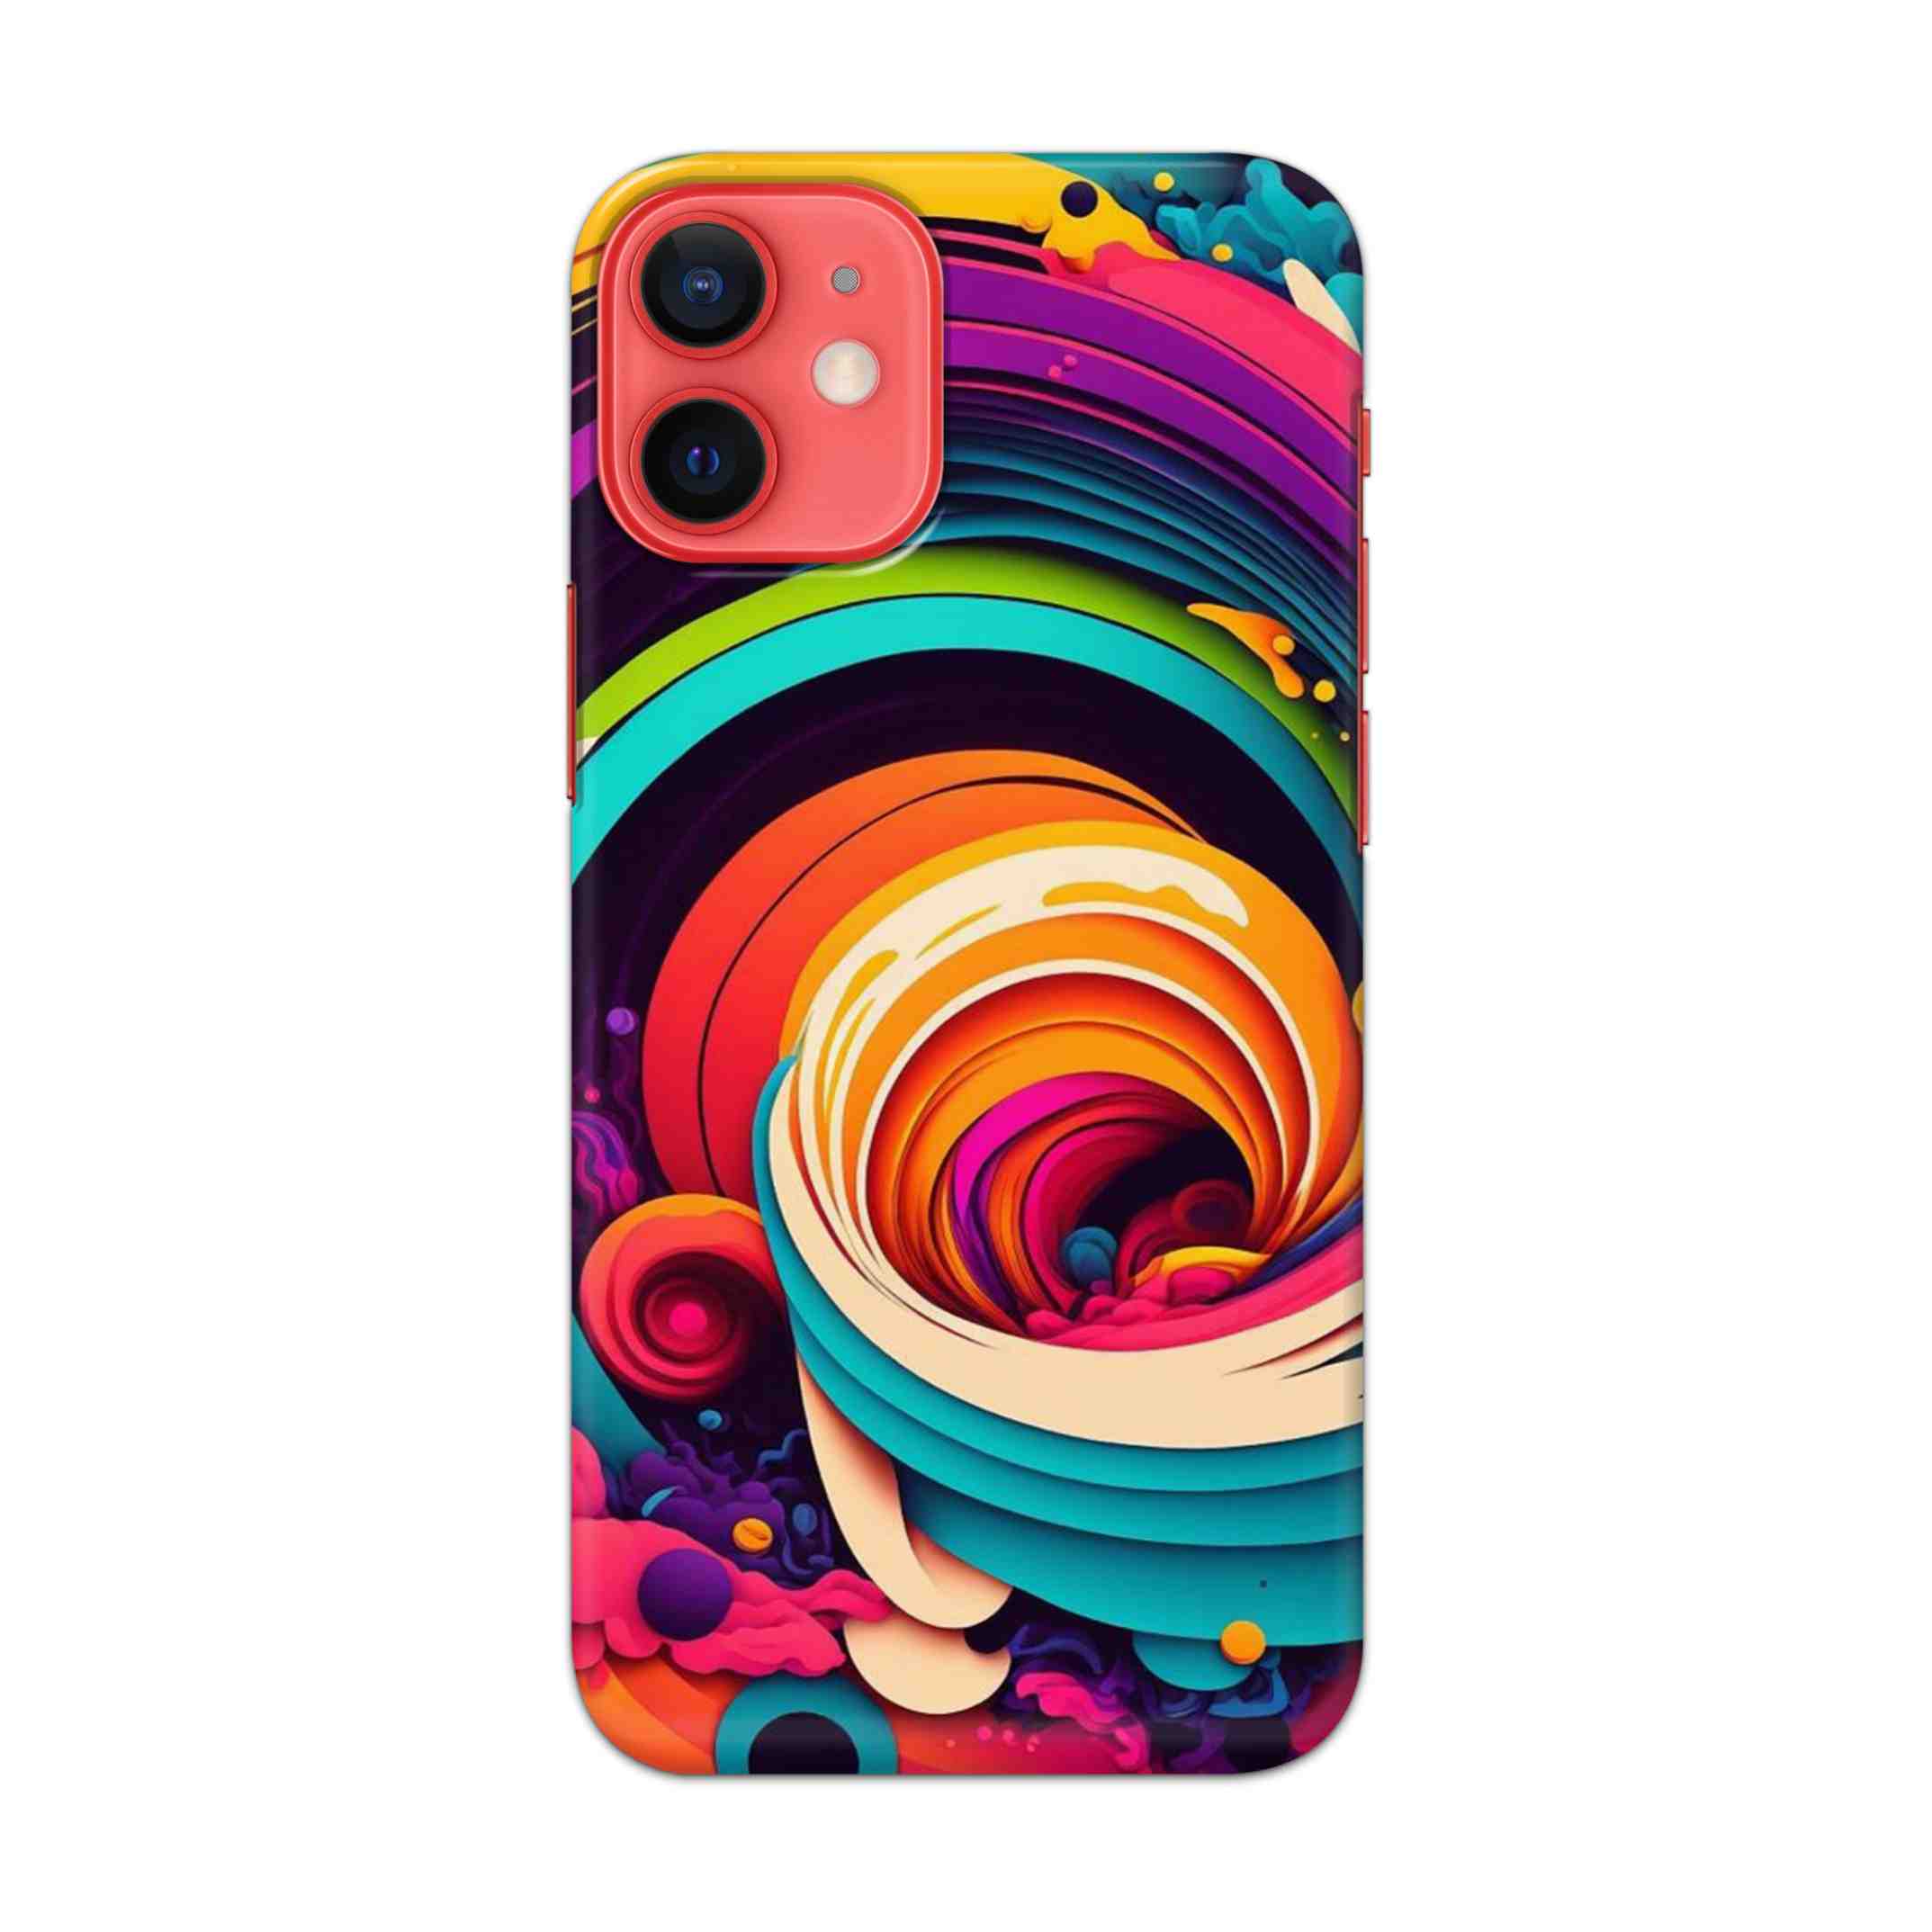 Buy Colour Circle Hard Back Mobile Phone Case/Cover For Apple iPhone 12 mini Online